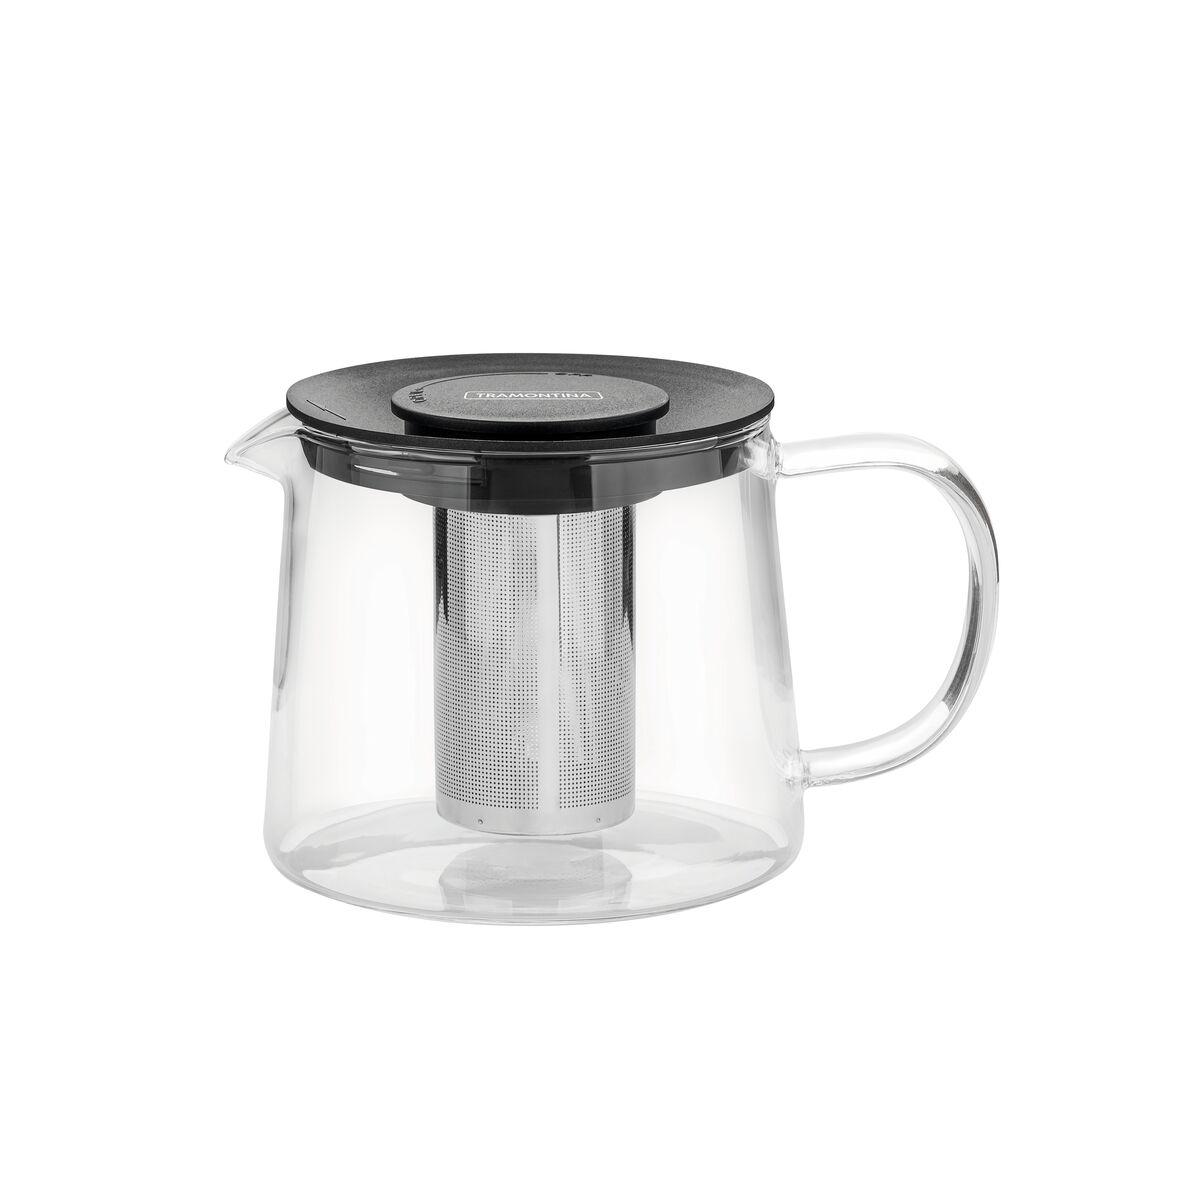 Tramontina glass and stainless steel teapot with infuser, 900 ml